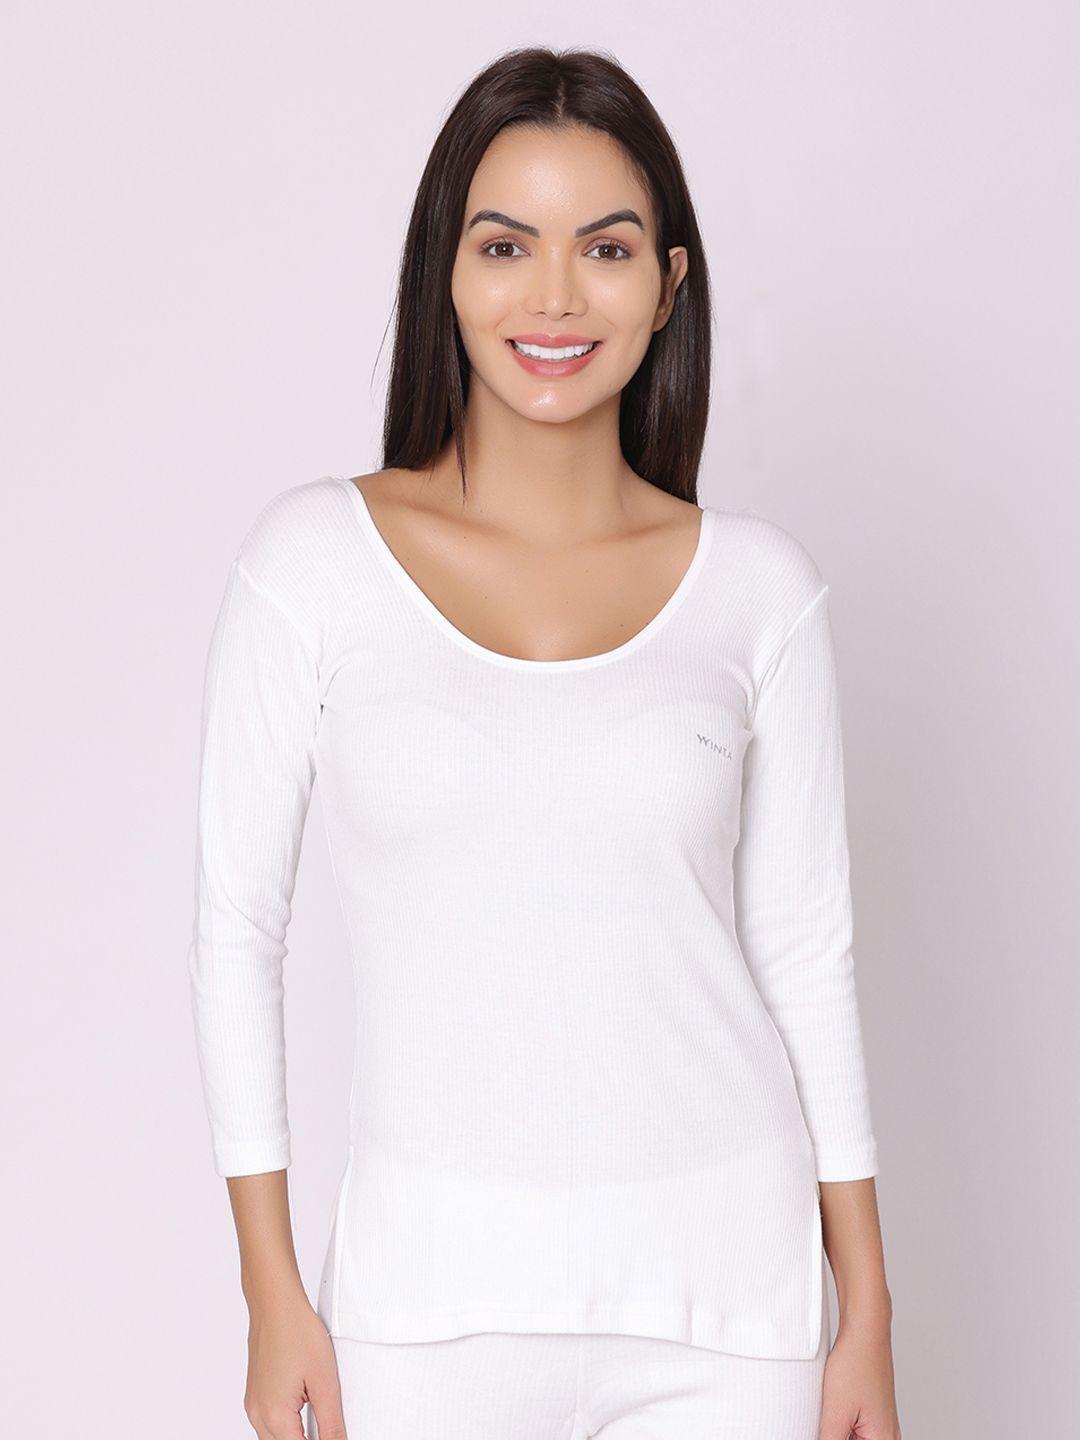 groversons paris beauty women white solid thermal tops